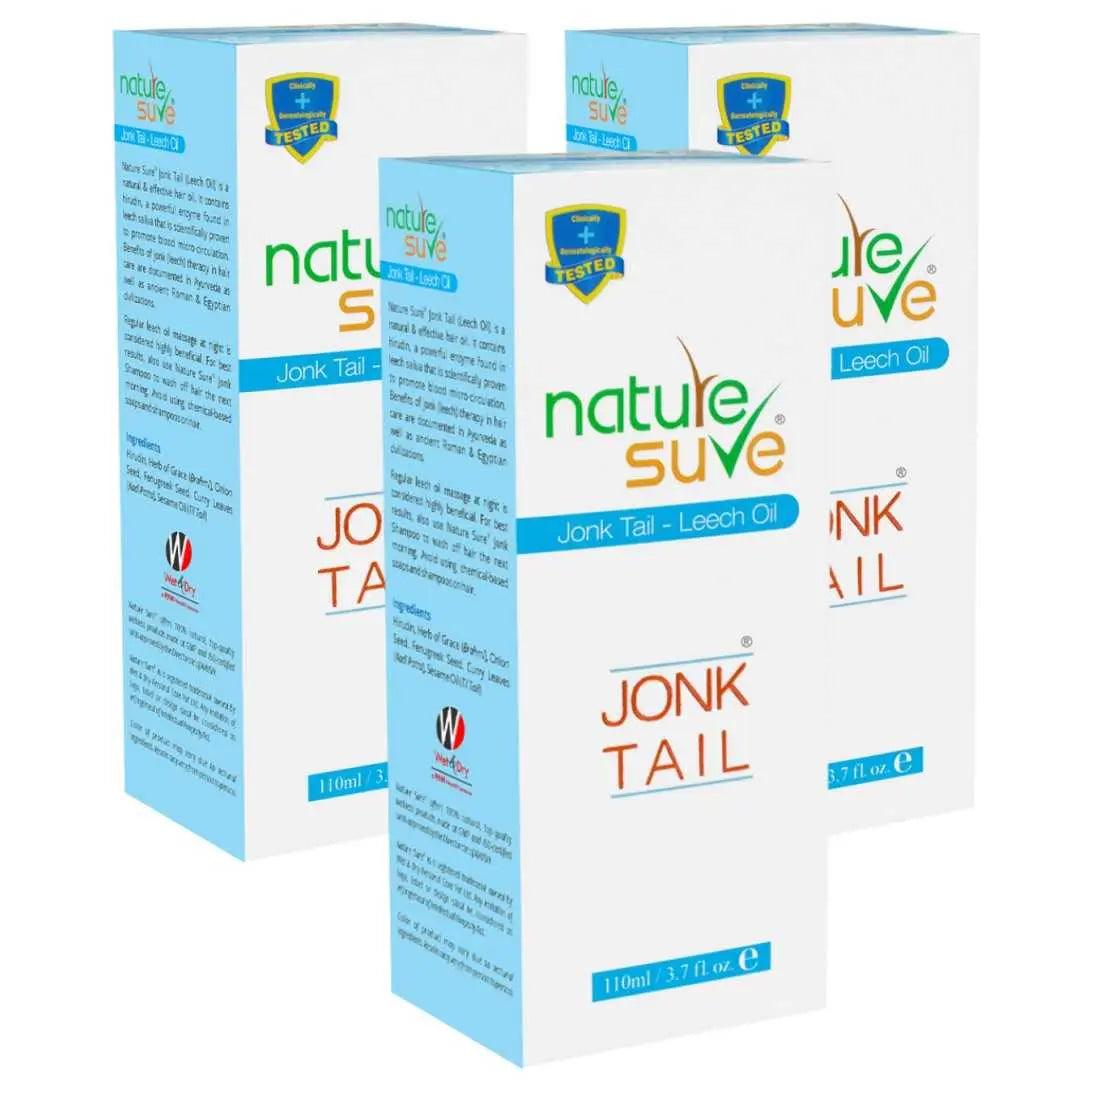 Nature Sure Jonk Tail for Hair Problems in Men and Women - 110ml 8903540010008